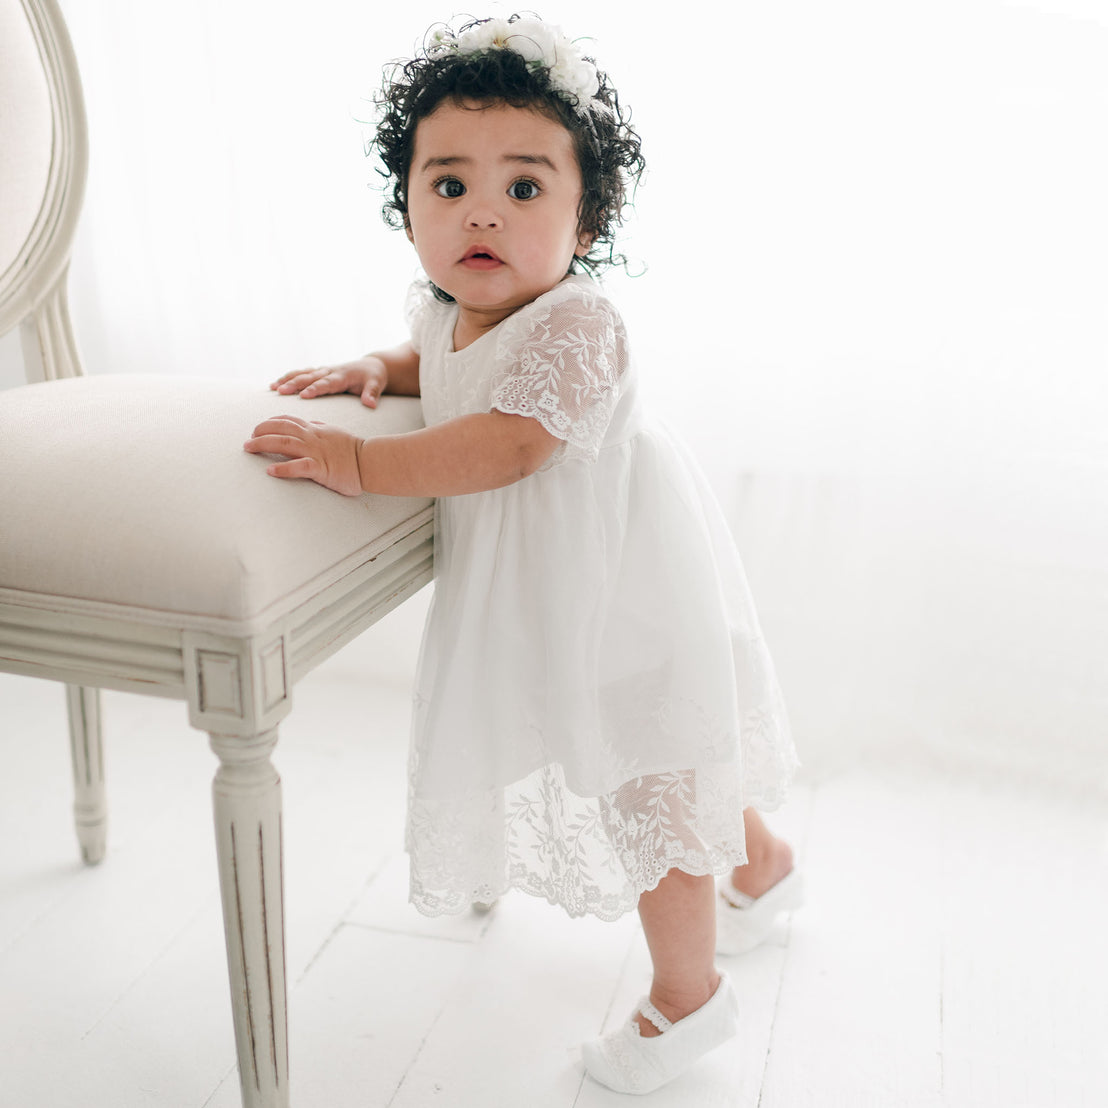 A toddler with curly hair, wearing an Ella Romper Dress and white shoes, stands and holds onto a cream-colored upholstered chair in a brightly lit room.